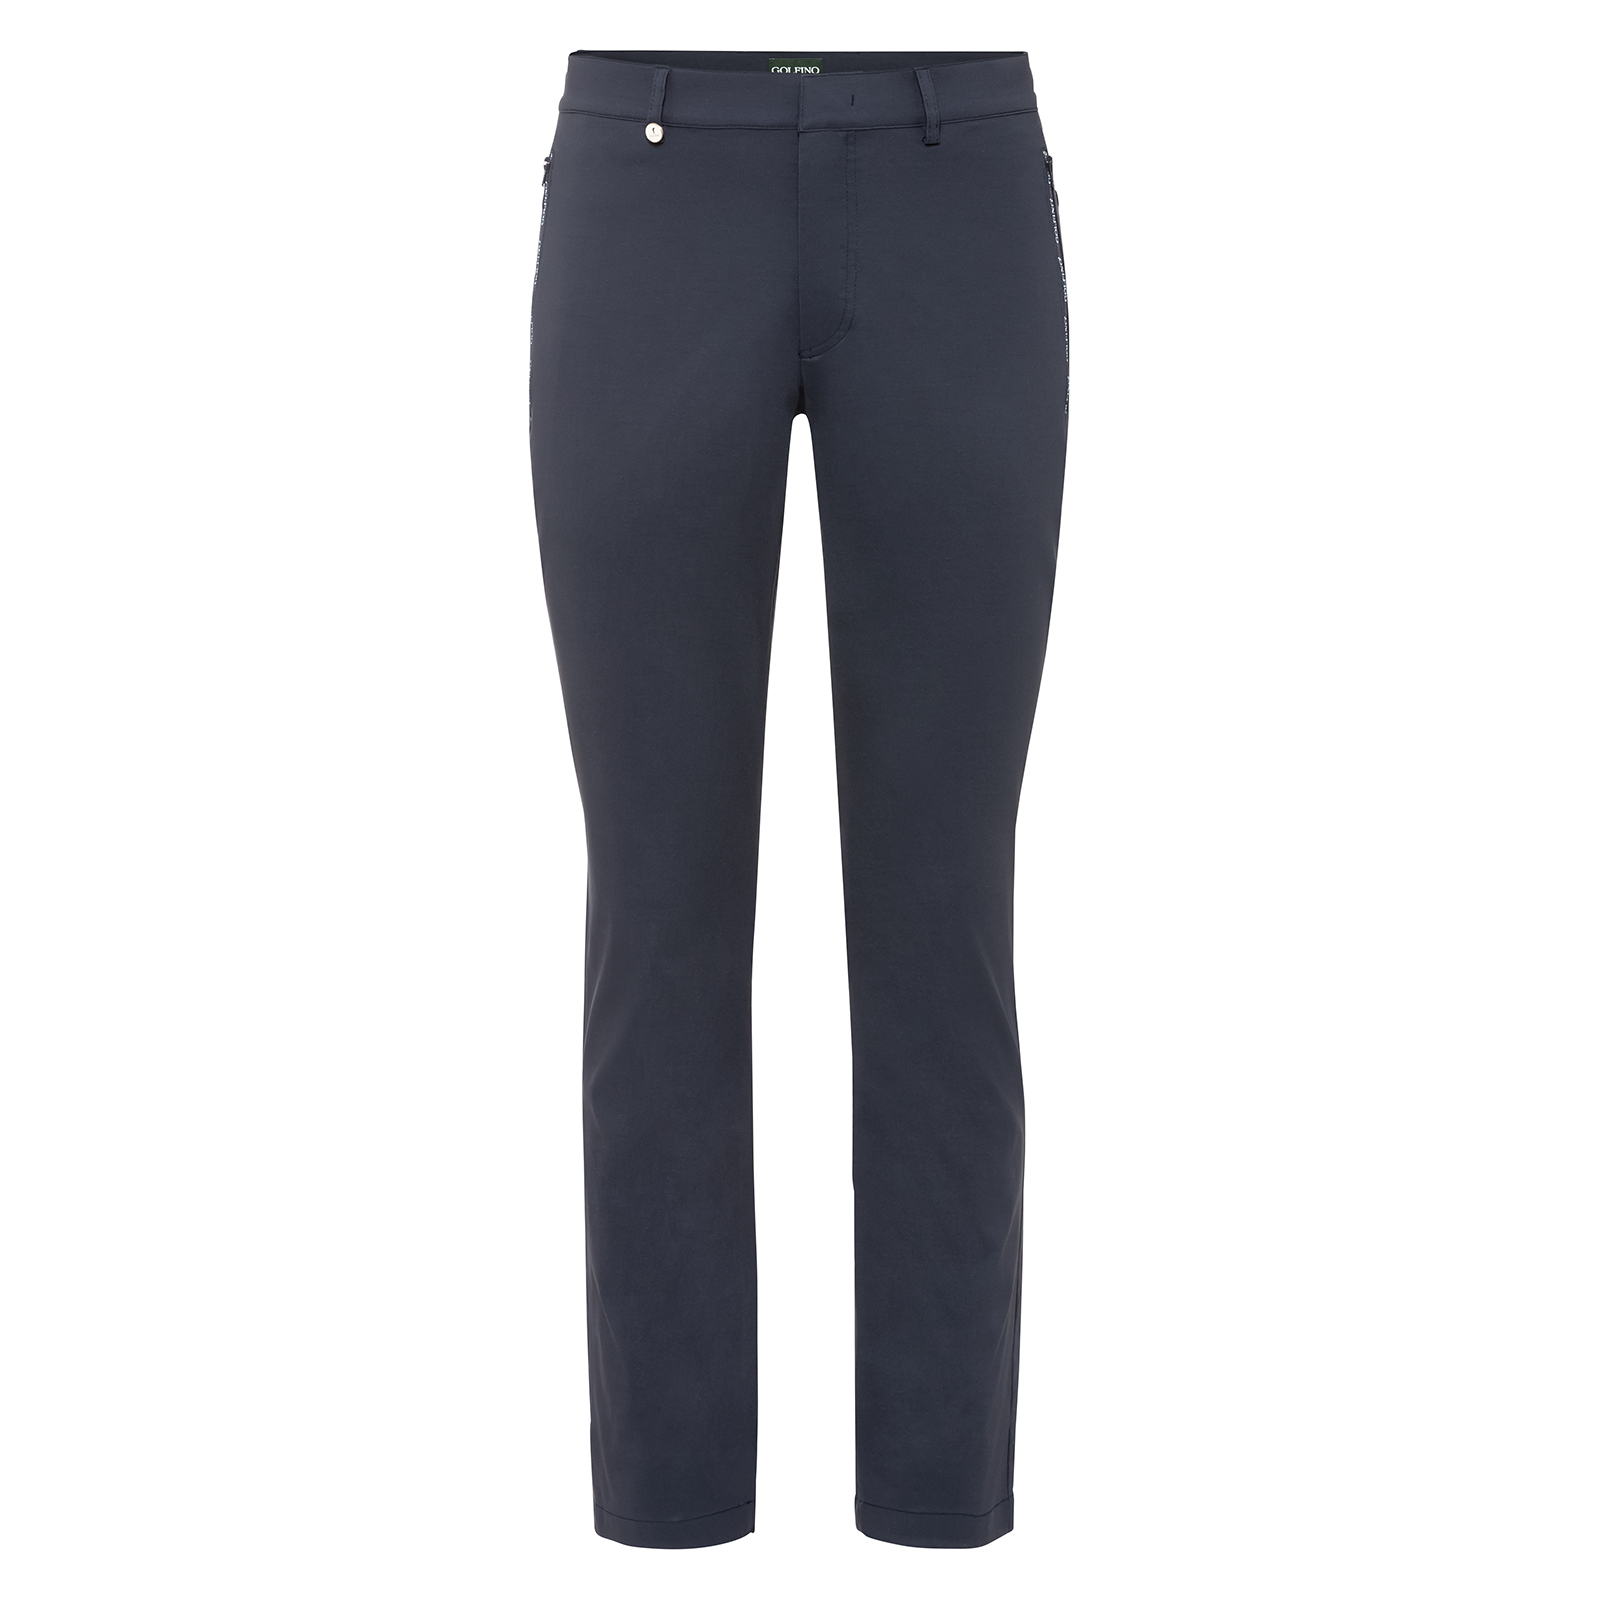 Men’s warm golf trousers with piped pockets